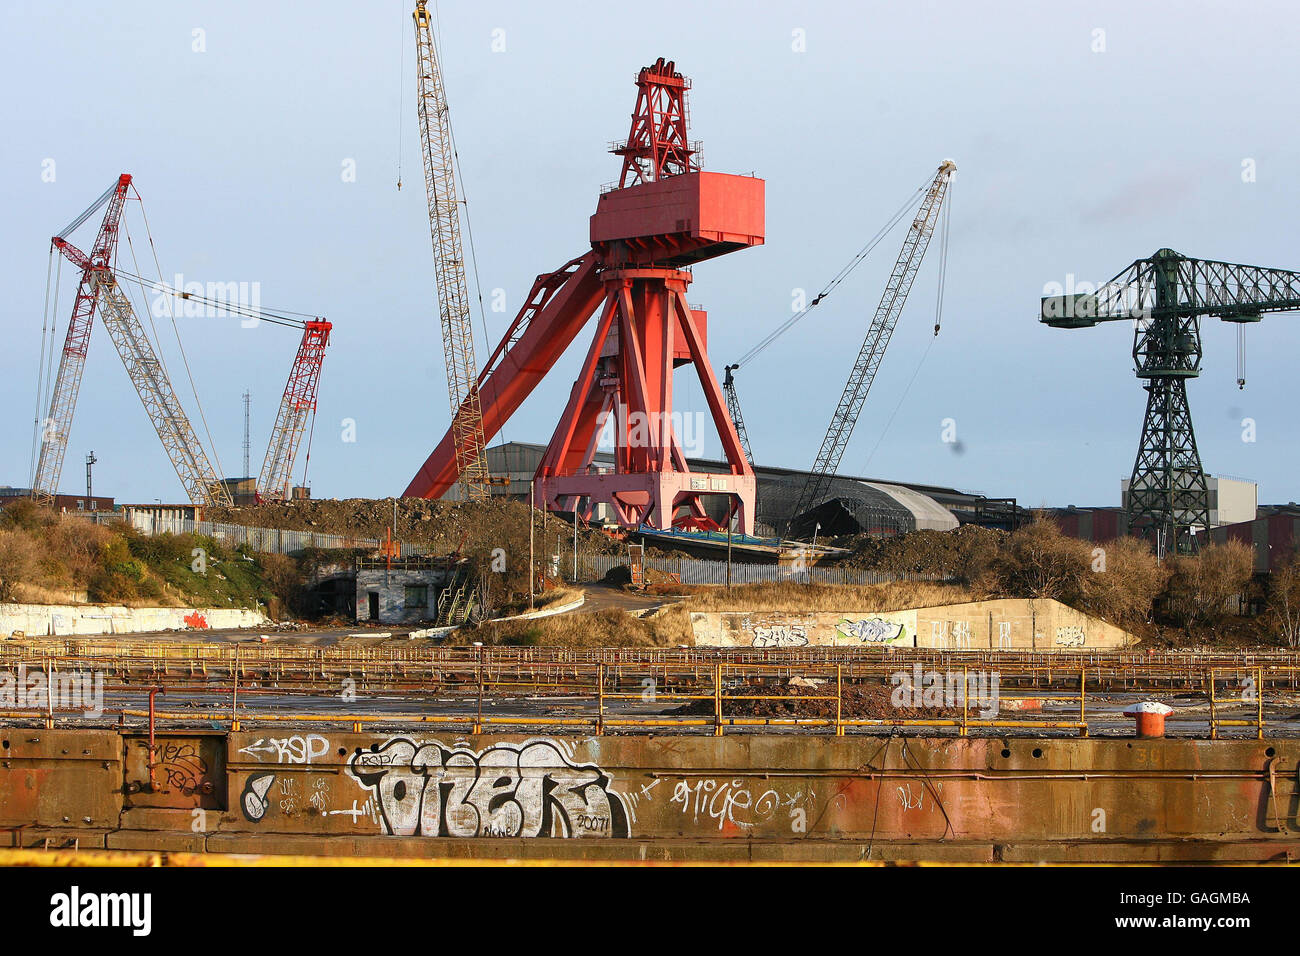 The famous Swan Hunter's cranes lie half dismantled at the dormant shipyard once famous for employing 1000 of workers on the River Tyne. Stock Photo